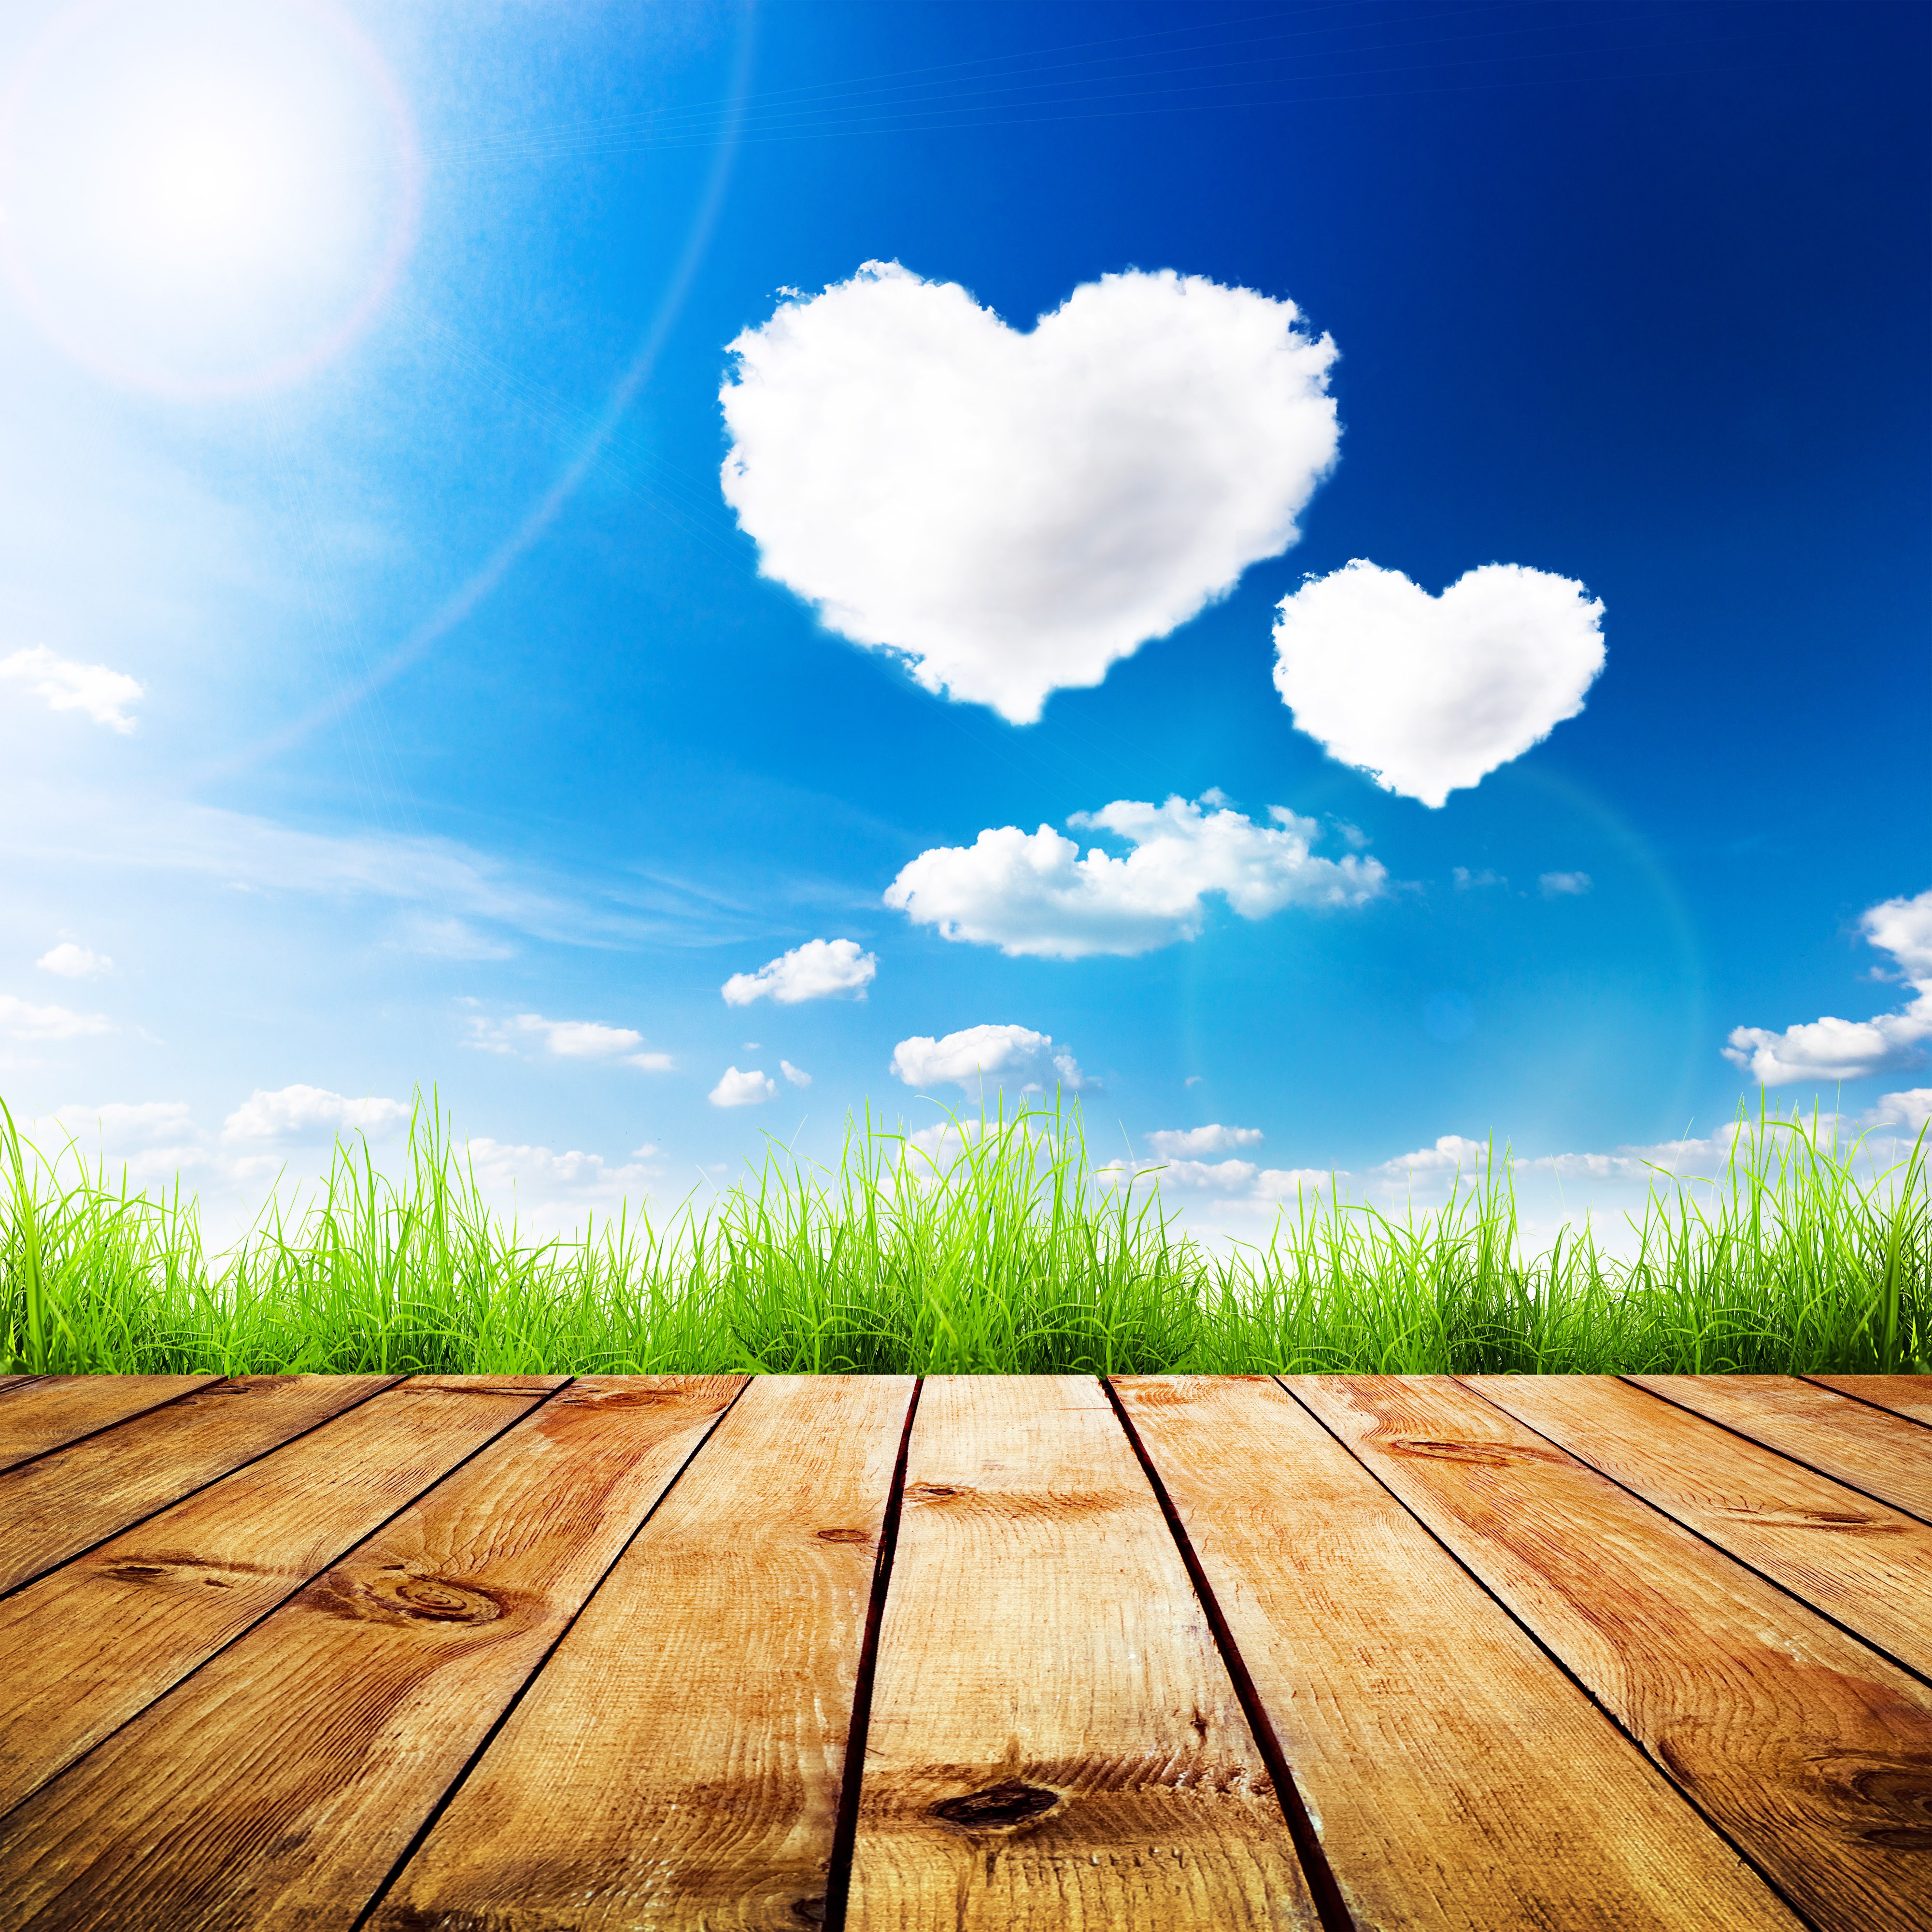 4K, Sky, Valentine's Day, Wood planks, Grass, Clouds, Heart Gallery HD Wallpaper